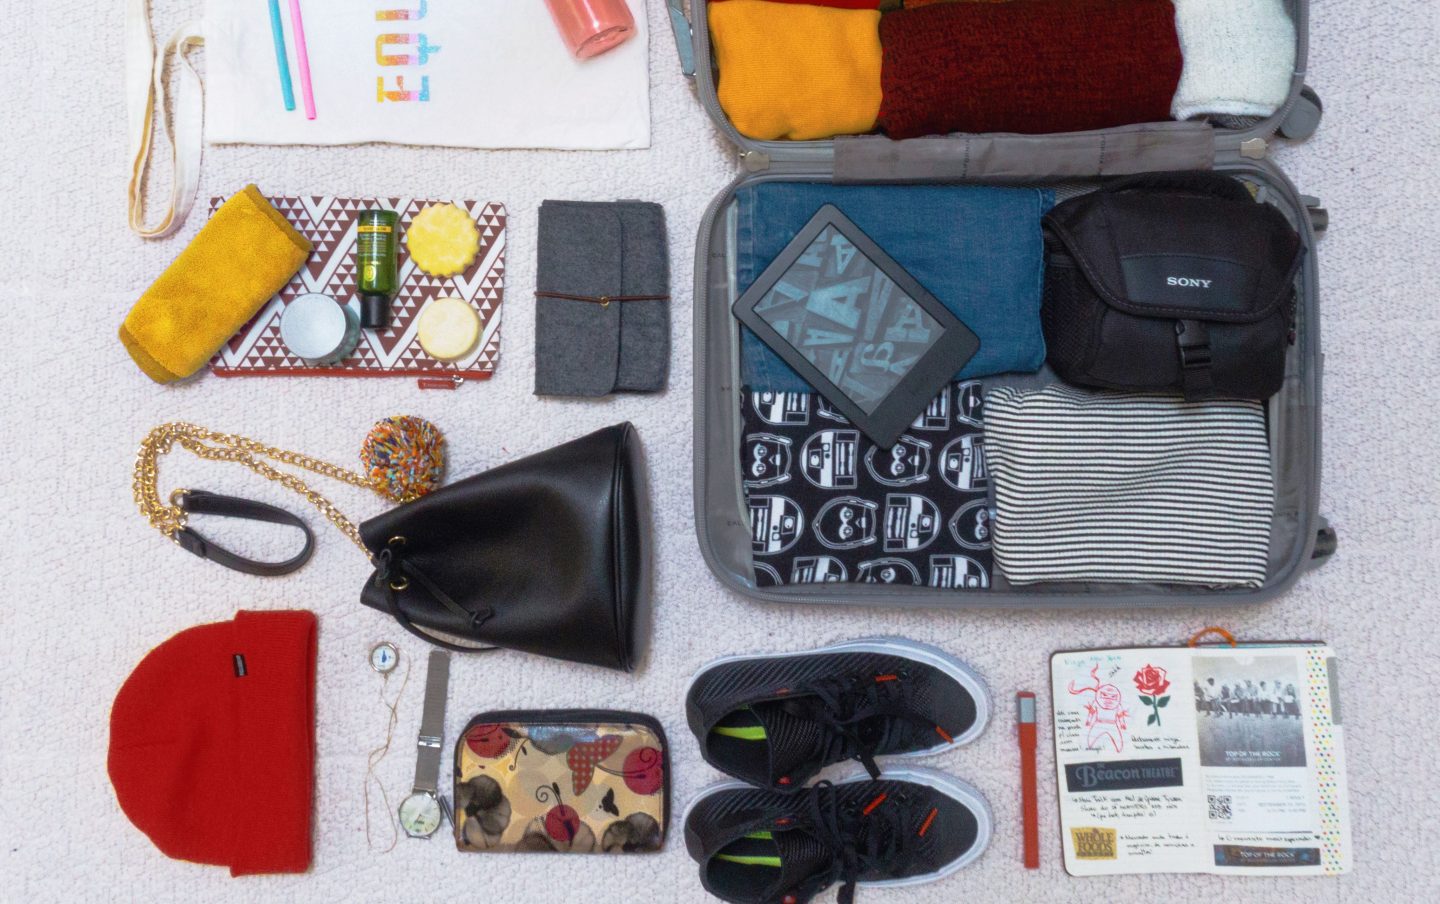 How to pack light and be an eco-friendly traveler